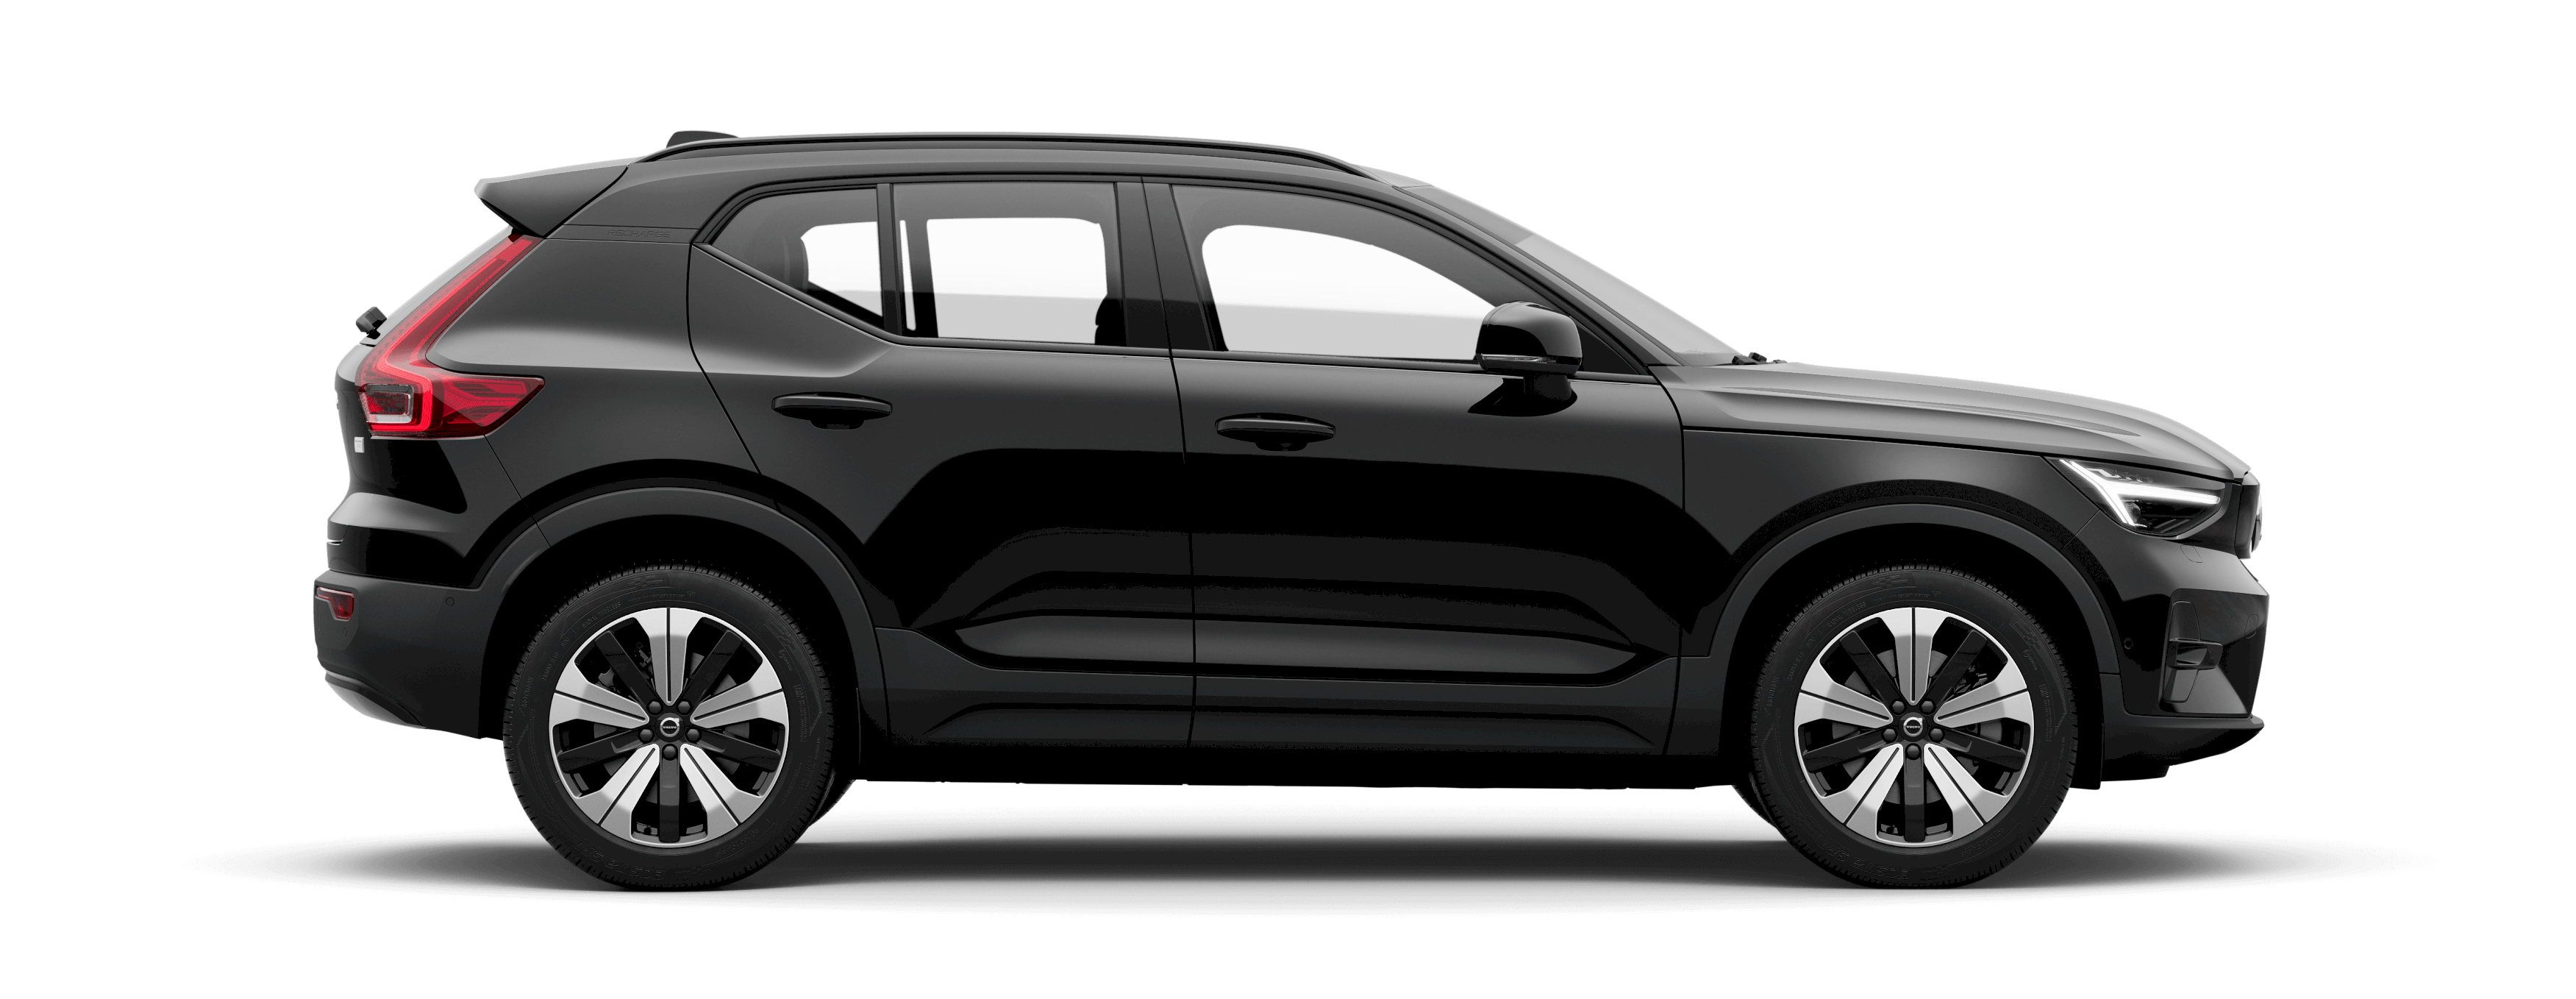 MY23XC40Recharge-Ultimate-DarkBlack-StoneSeitenansicht_processed.png